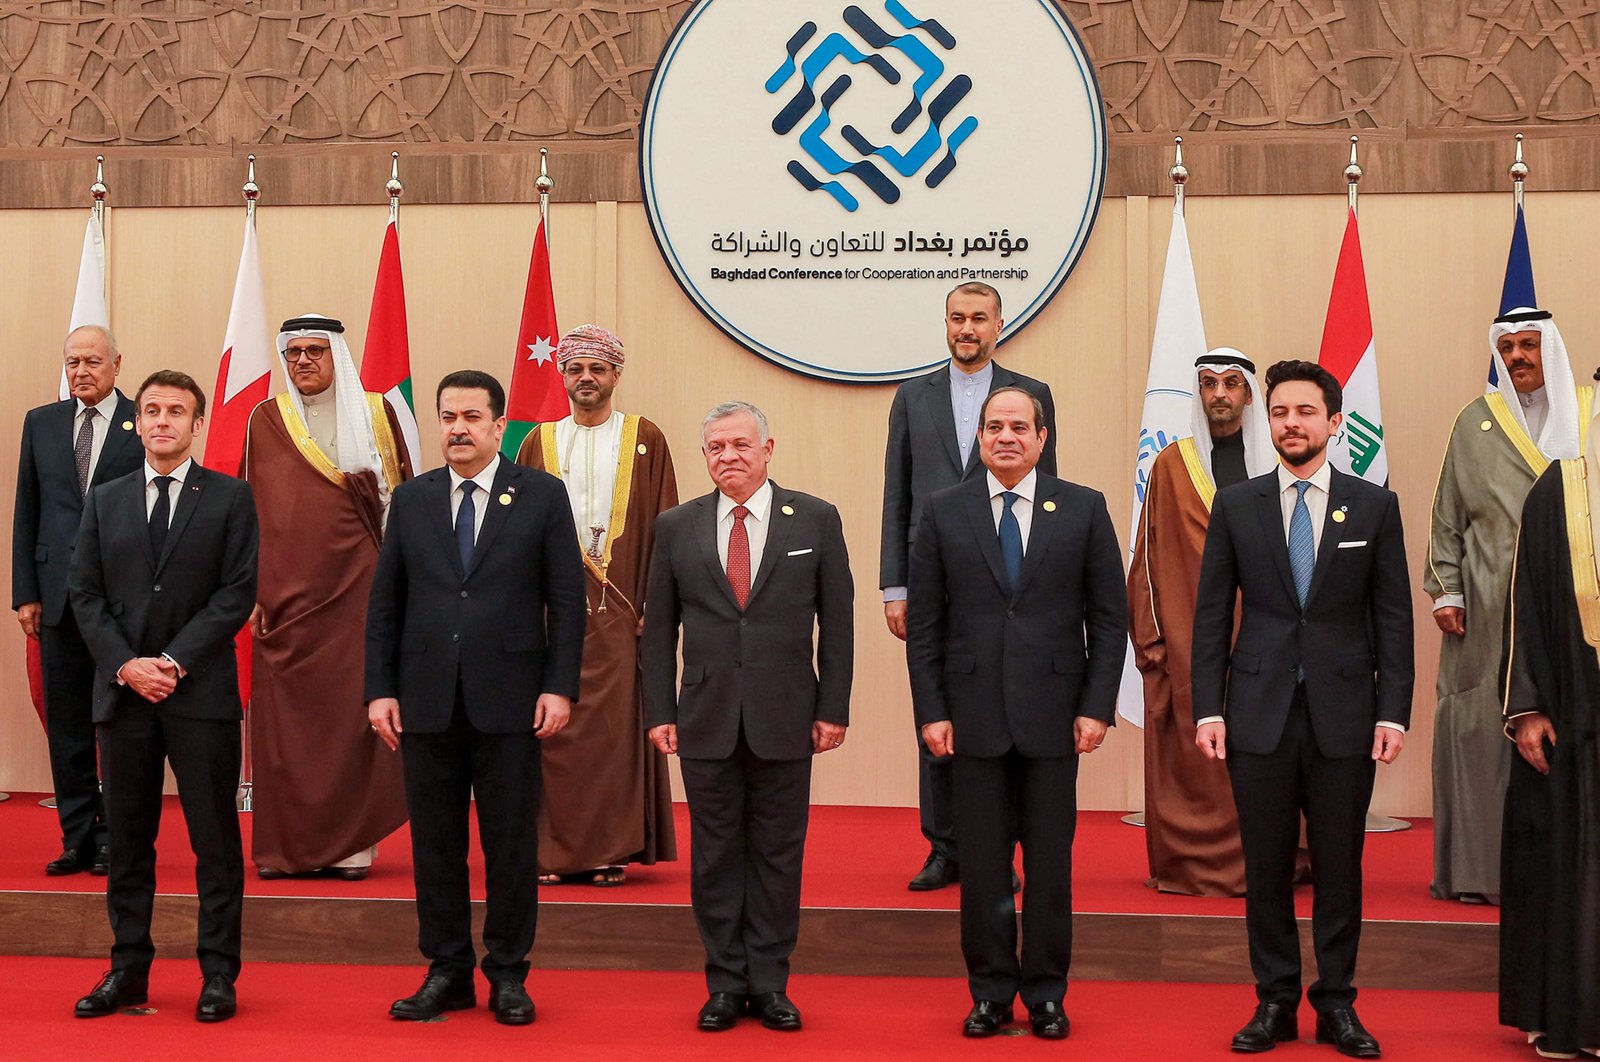 (Front L to R) French President Emmanuel Macron, Iraq&#039;s Prime Minister Mohamed Shia al-Sudani, Jordan&#039;s King Abdullah, Egypt&#039;s President Abdel Fattah el-Sissi, and Jordan&#039;s Crown Prince Hussein; along with Iranian Foreign Minister Hossein Amir-Abdollahian (4th-L behind) and other dignitaries pose together in a family photo at the start of the &quot;Baghdad Conference for Cooperation and Partnership&quot; in Sweimeh, Jordan, Dec. 20, 2022. (AFP Photo)